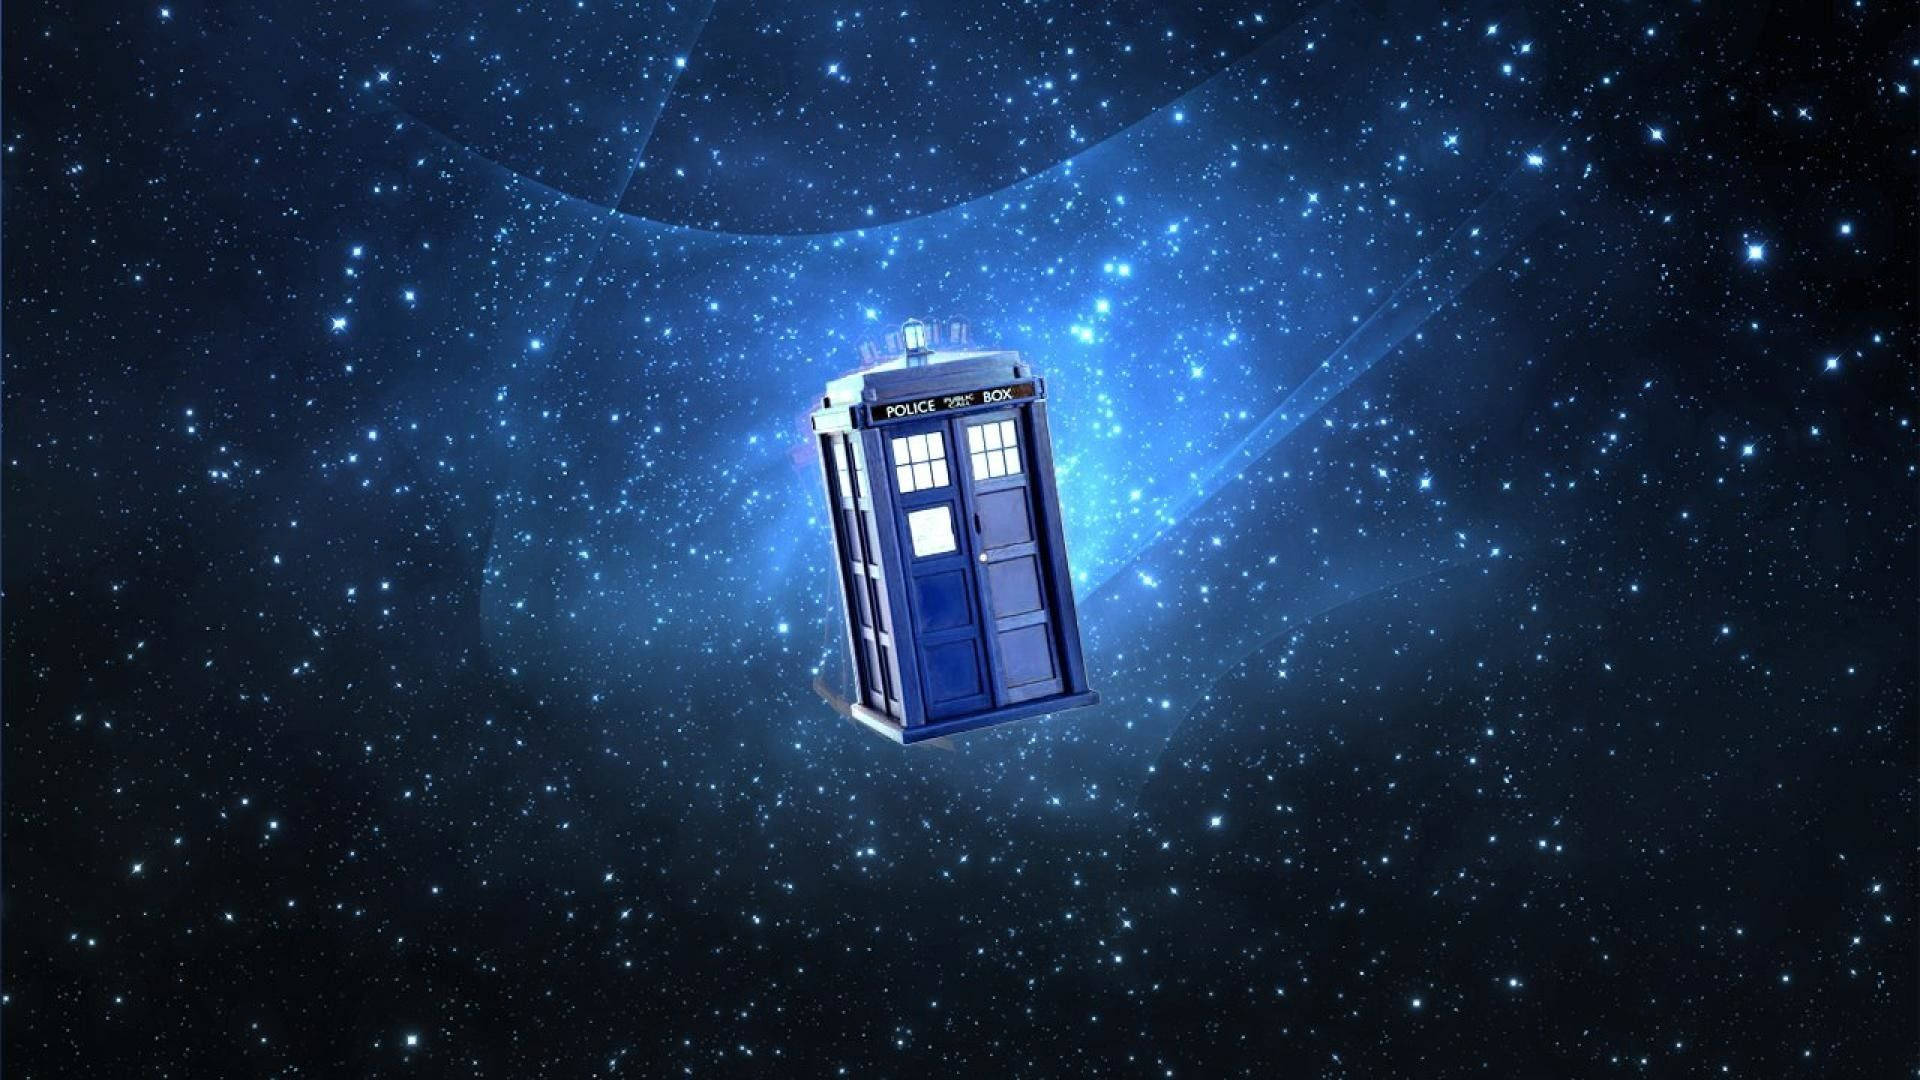 "The TARDIS travels the universe in search of adventure, Doctor Who leading the way." Wallpaper